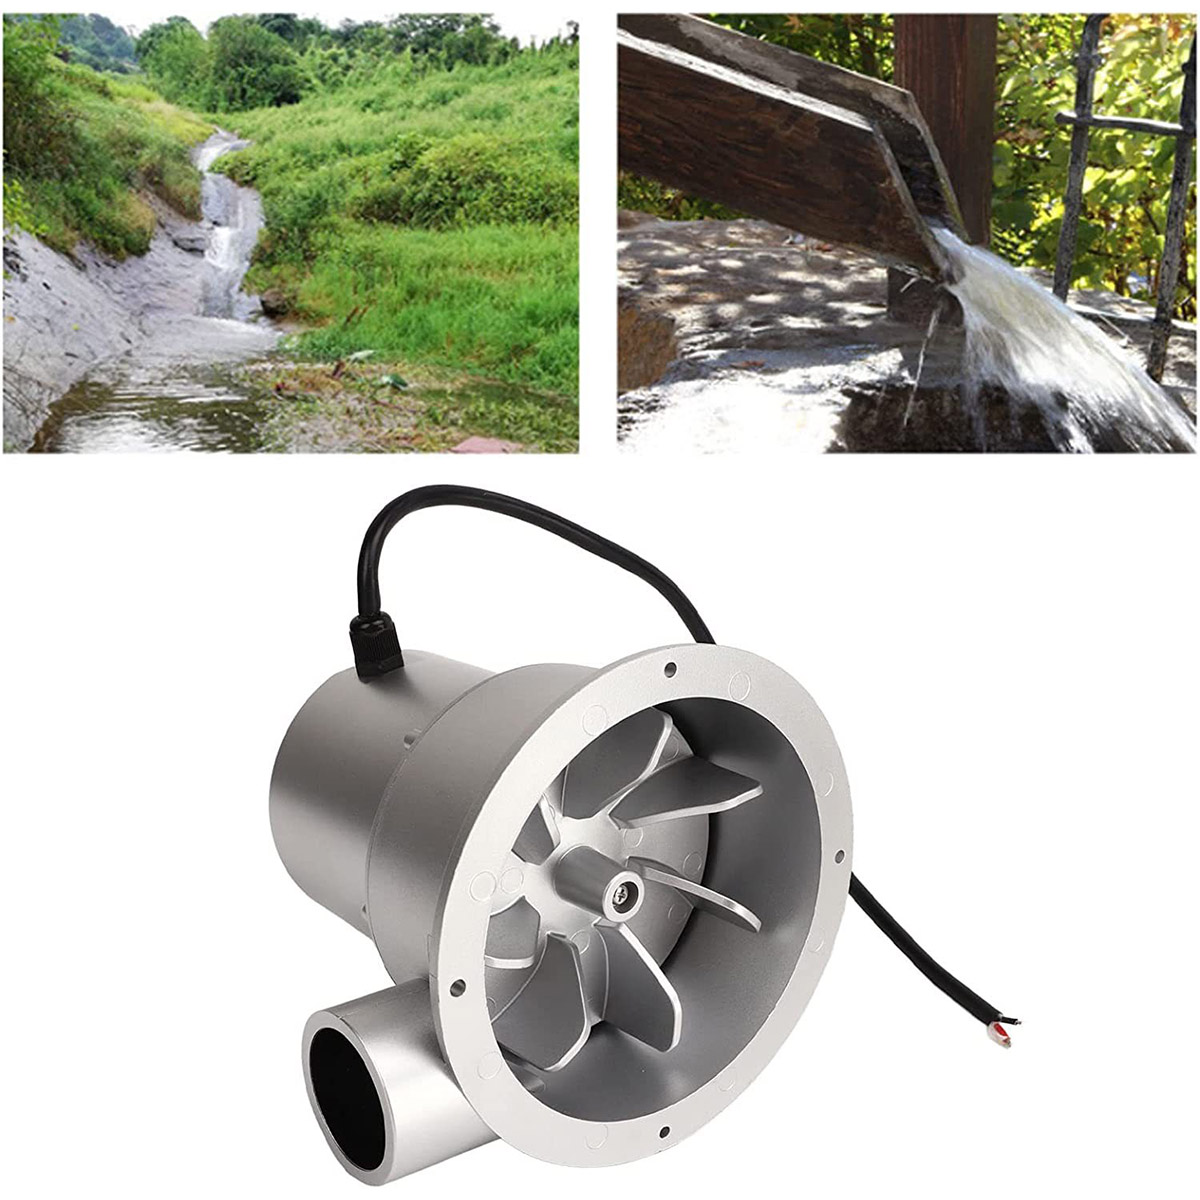 SJ18B High Efficiency Hydro Generator DC 36V No Load Voltage Supports 12V&24V Battery Charging Compact Easy Install & Remote Control Capable Ideal for Stream-Powered Energy Projects